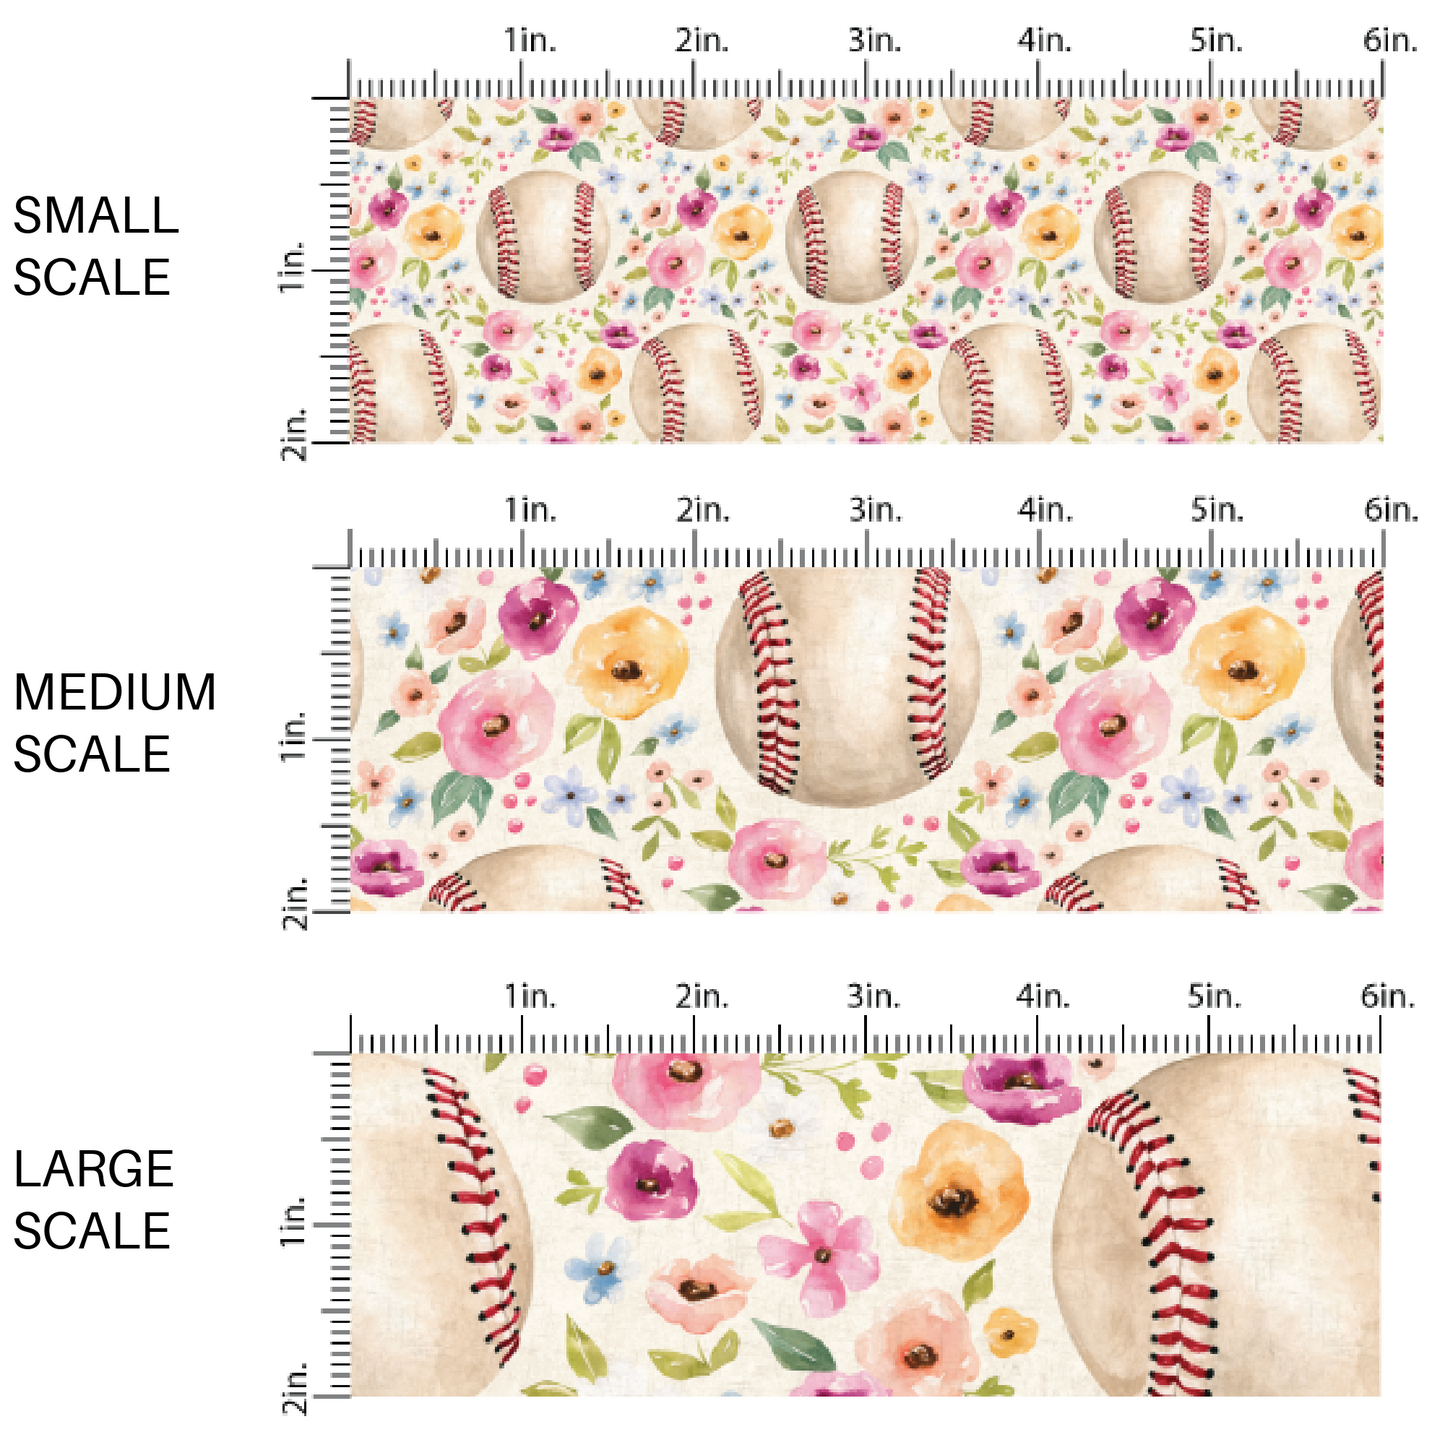 Pastel Florals and Baseballs on Cream Fabric by the Yard scaled image guide.